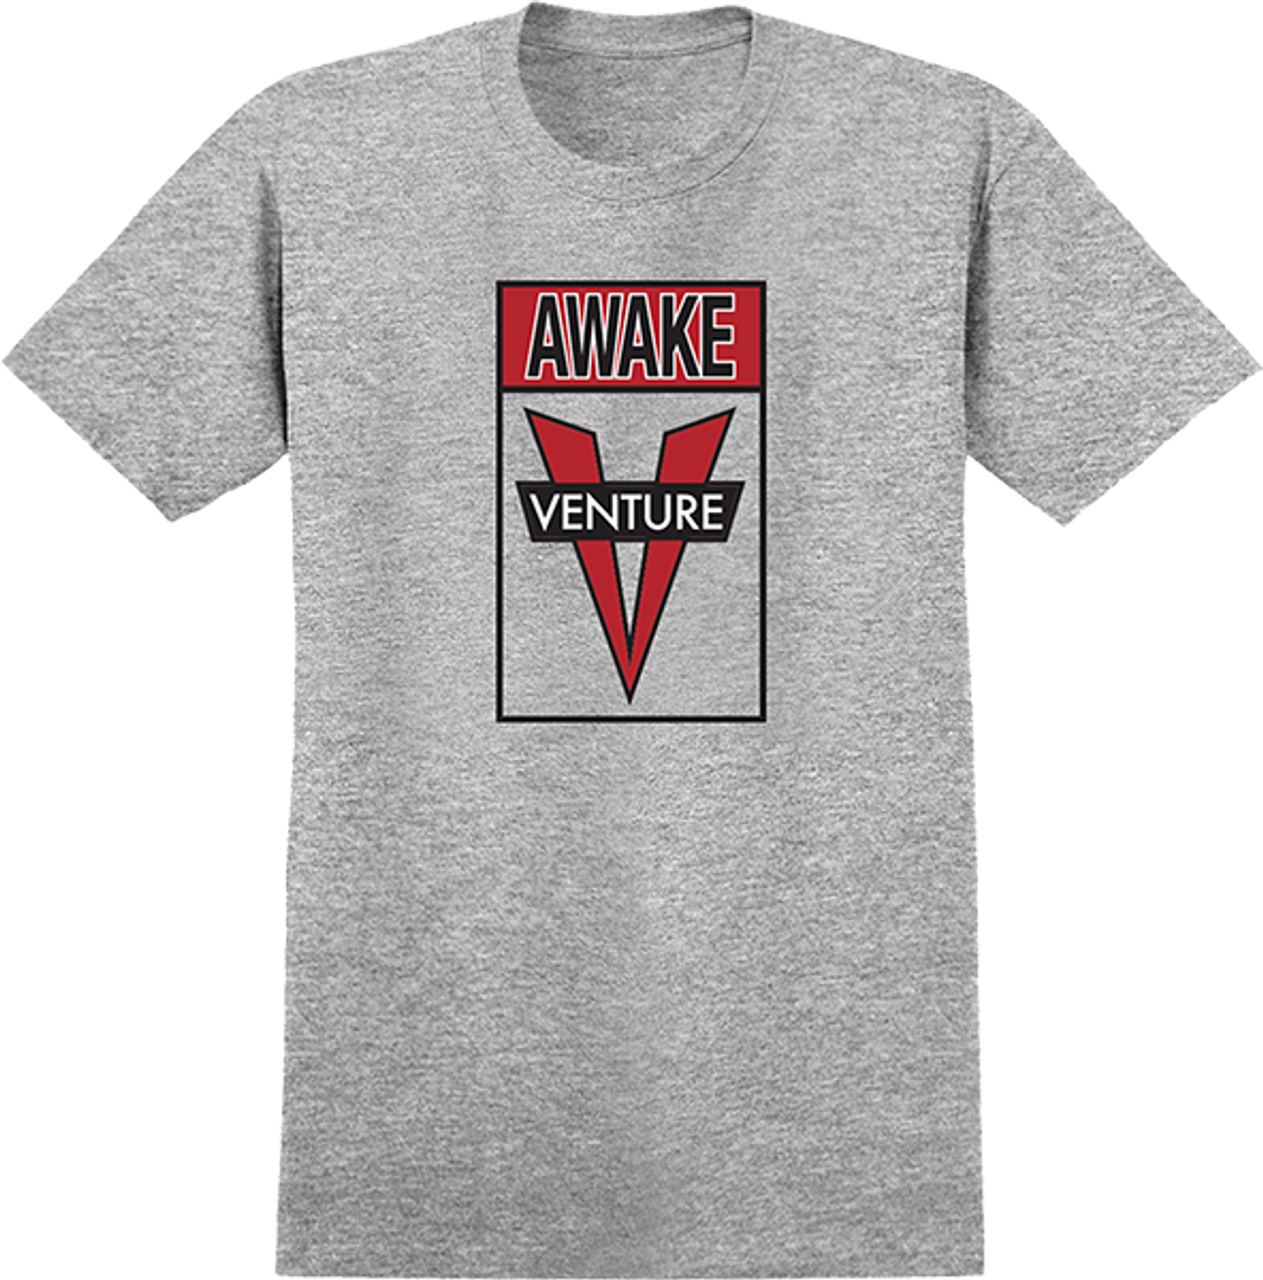 VENTURE OG AWAKE SS TSHIRT SMALL ATHLETIC HEATHER/BLK/RED